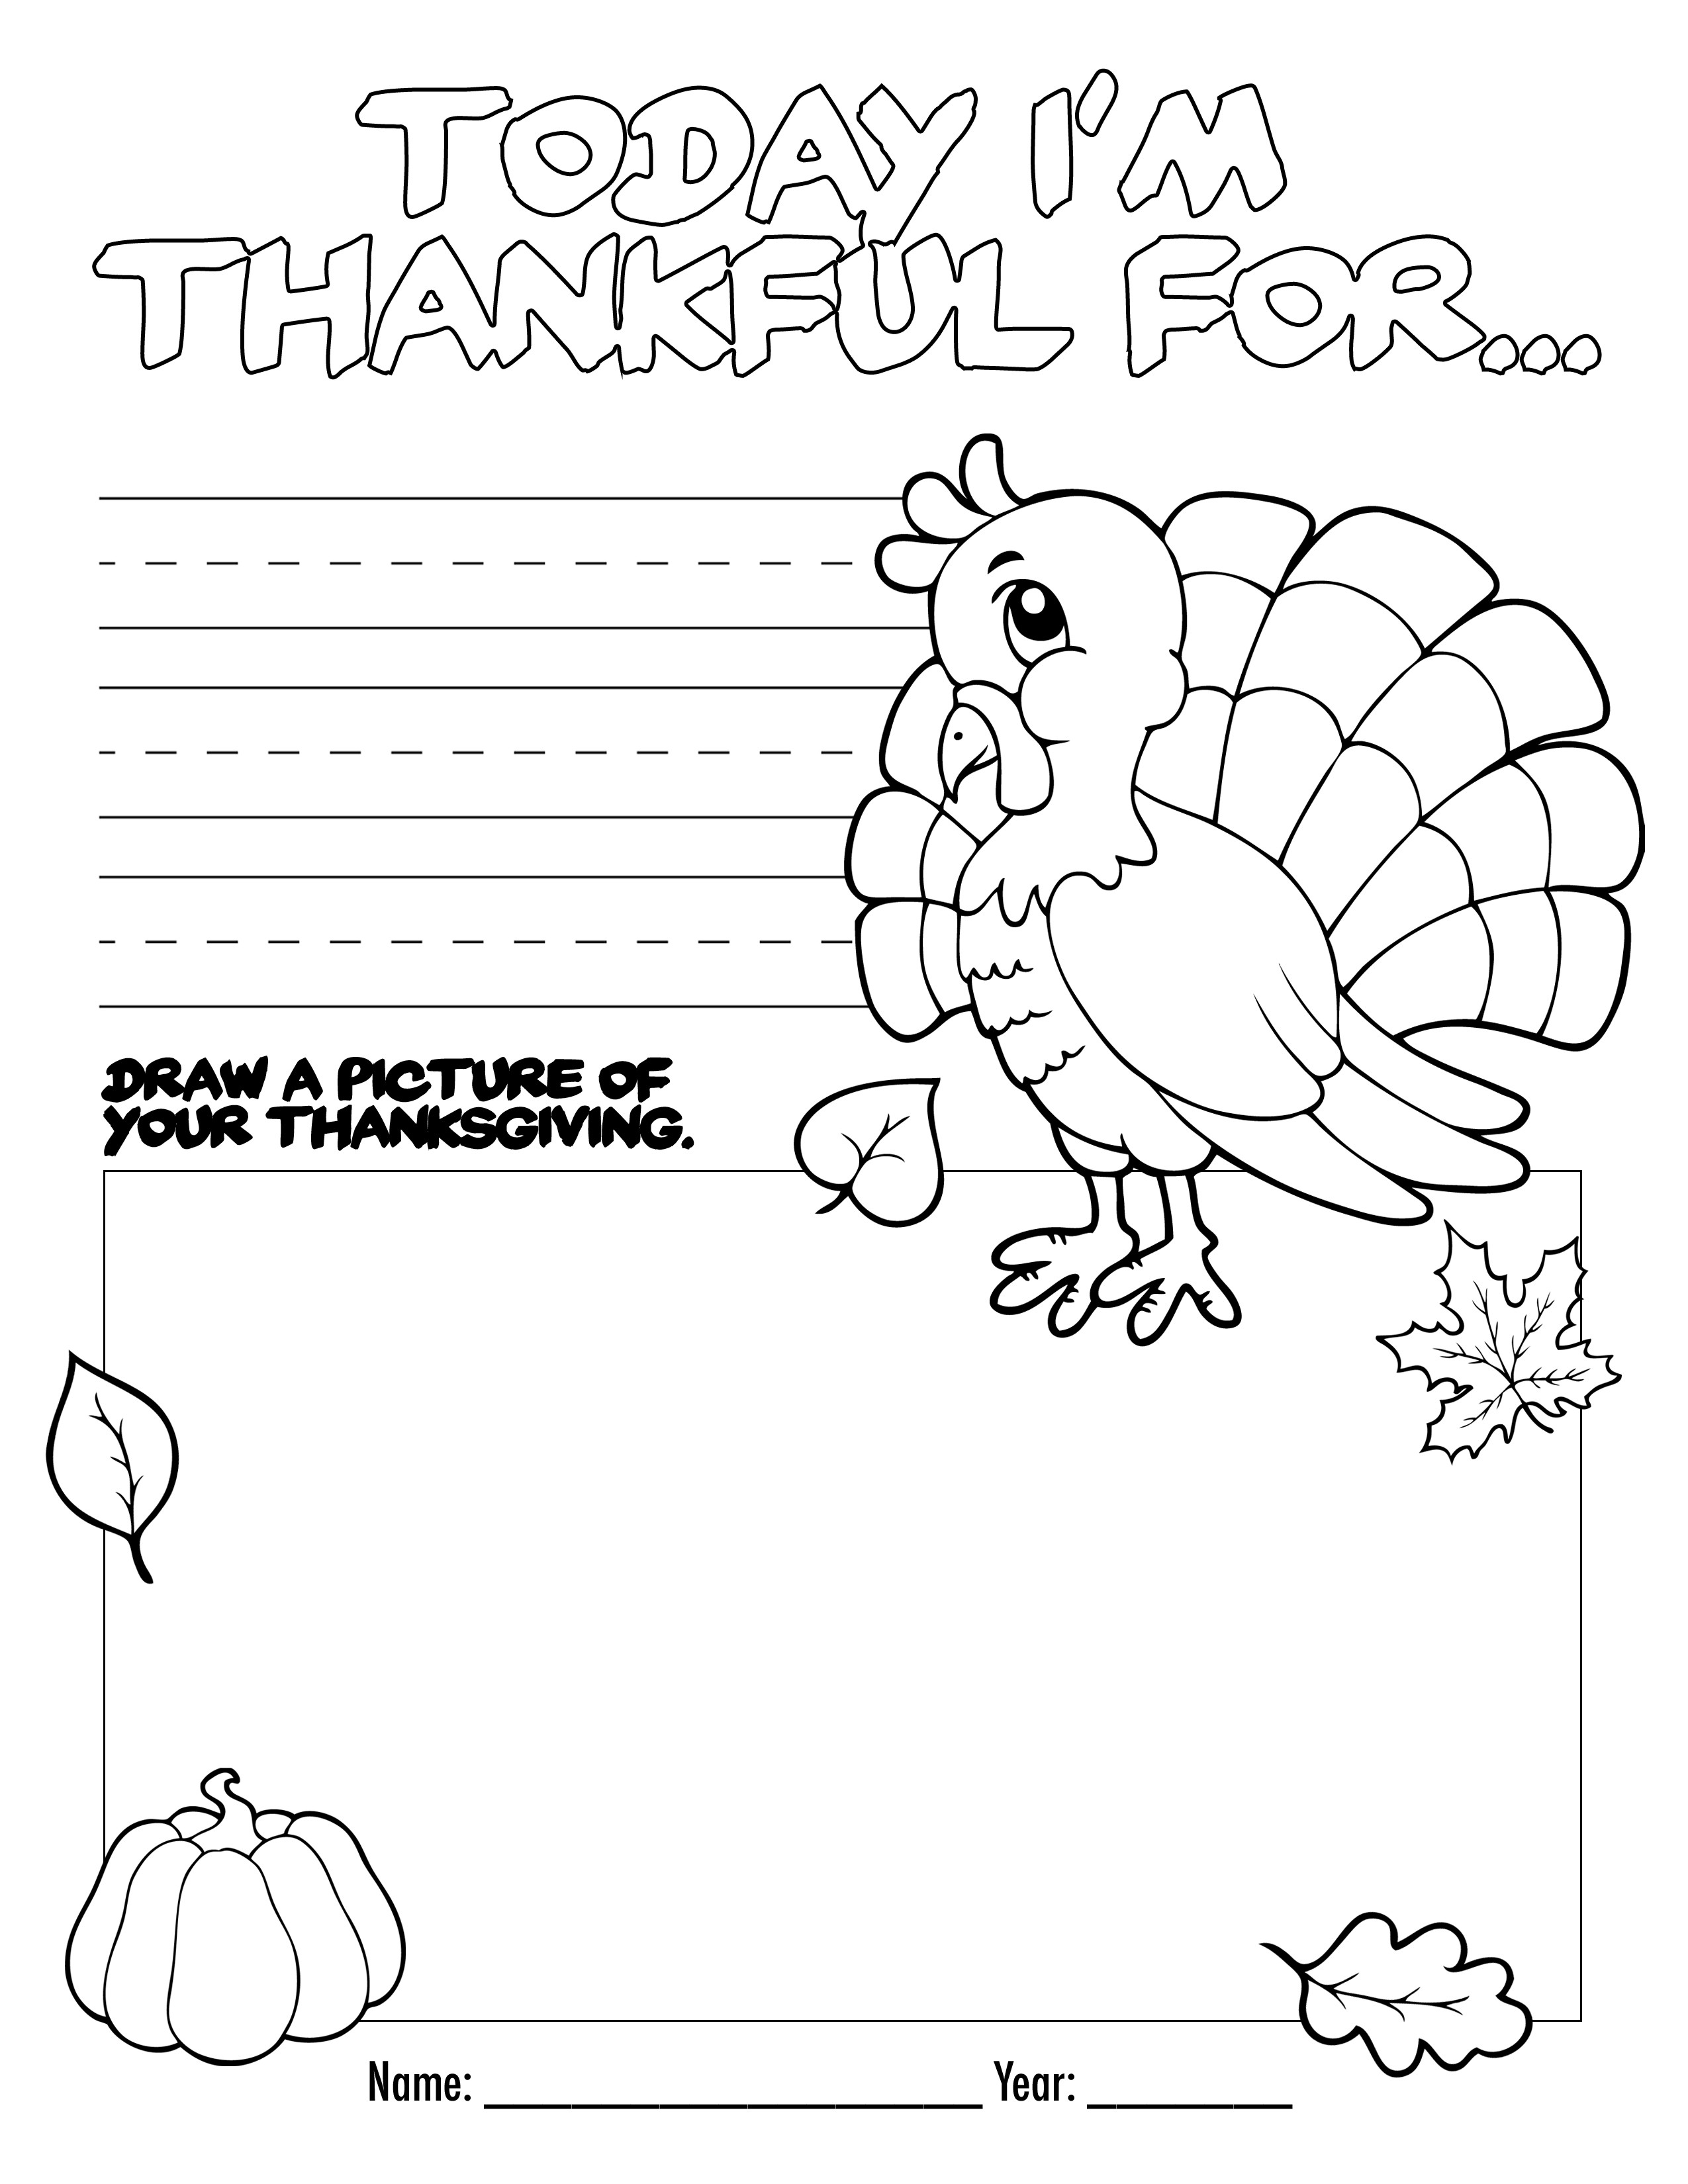 A Turkey For Thanksgiving Activity
 Thanksgiving Coloring Book free printable How to Nest